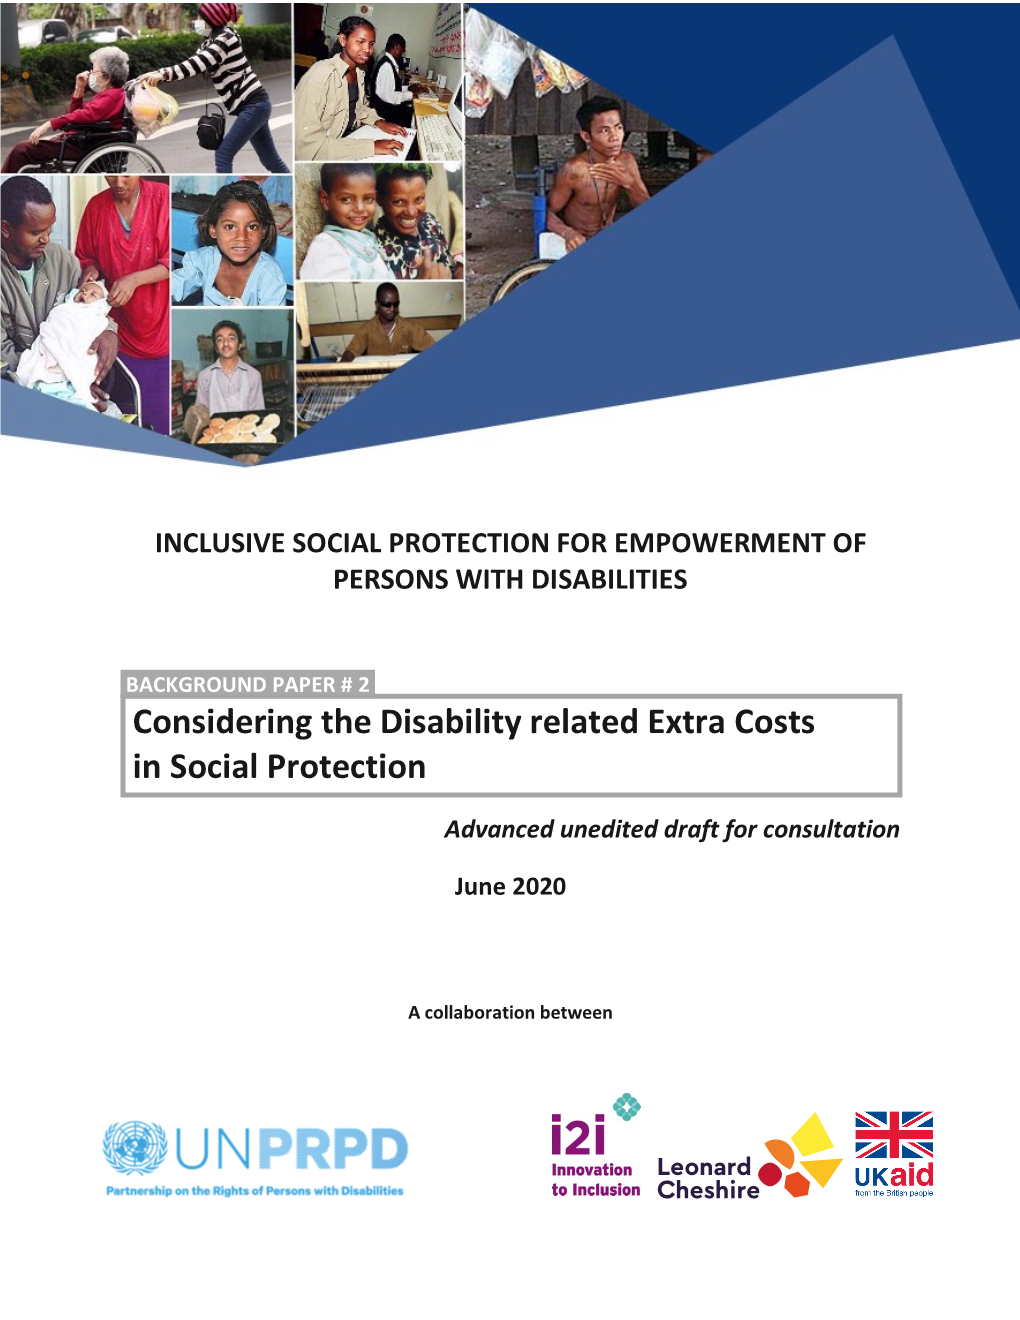 Considering the Disability Related Extra Costs in Social Protection